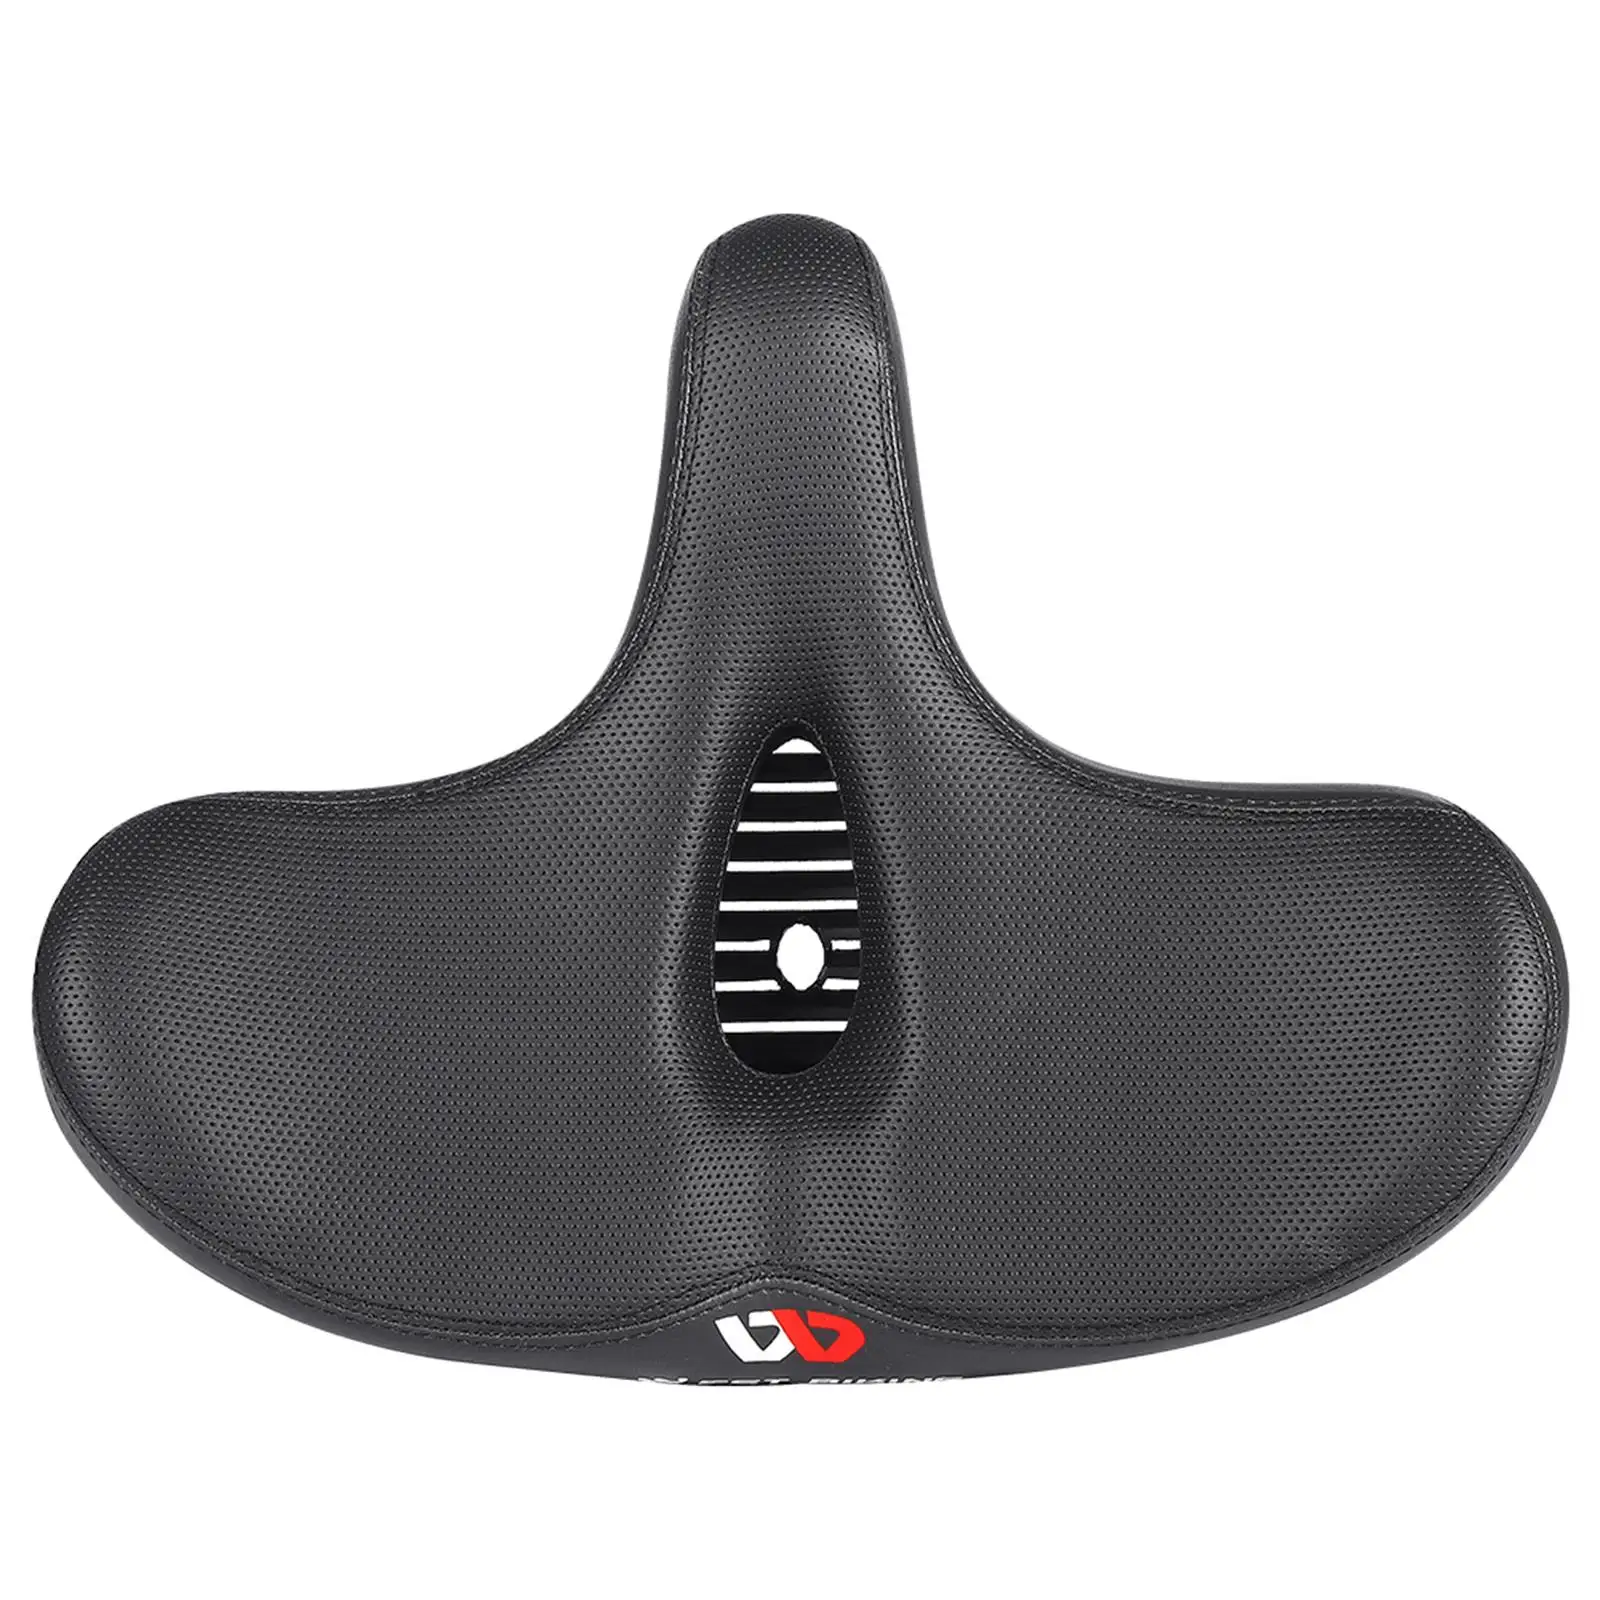 Comfort Bicycle Seat Shockproof Bike Saddle Road Shock Absorbing Mtb Breathable Cycling Saddle For Road Parts